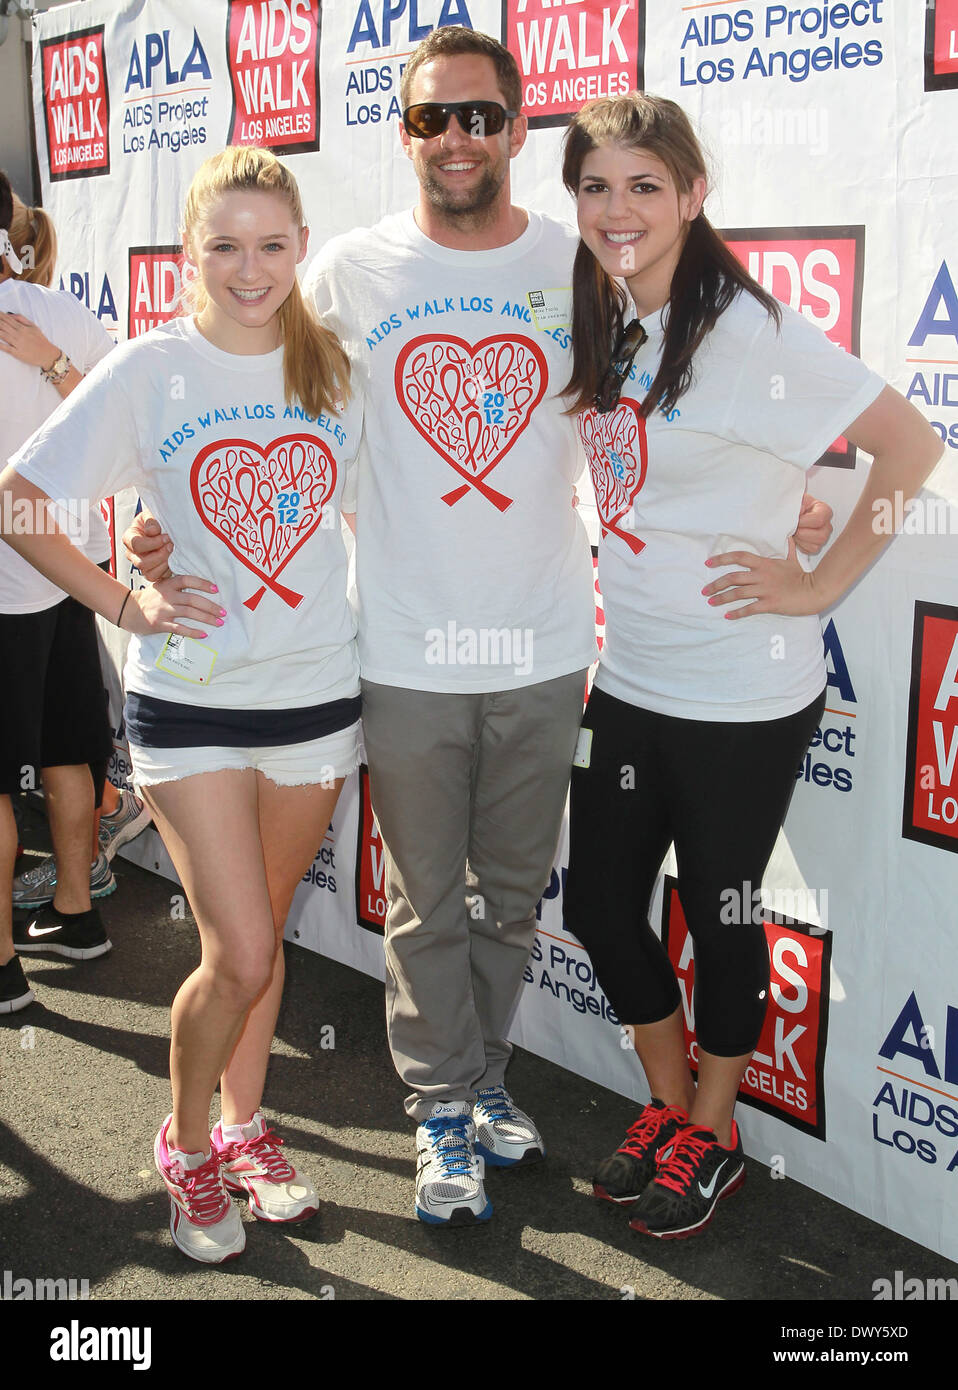 Mike Faiola, Greer Grammer, Molly Tarlov 28th Annual AIDS Walk Los Angeles in West Hollywood Los Angeles, California - 14.10.12 Featuring: Mike Faiola, Greer Grammer, Molly Tarlov Where: West Hollywood, California, United States When: 14 Oct 2012 Stock Photo